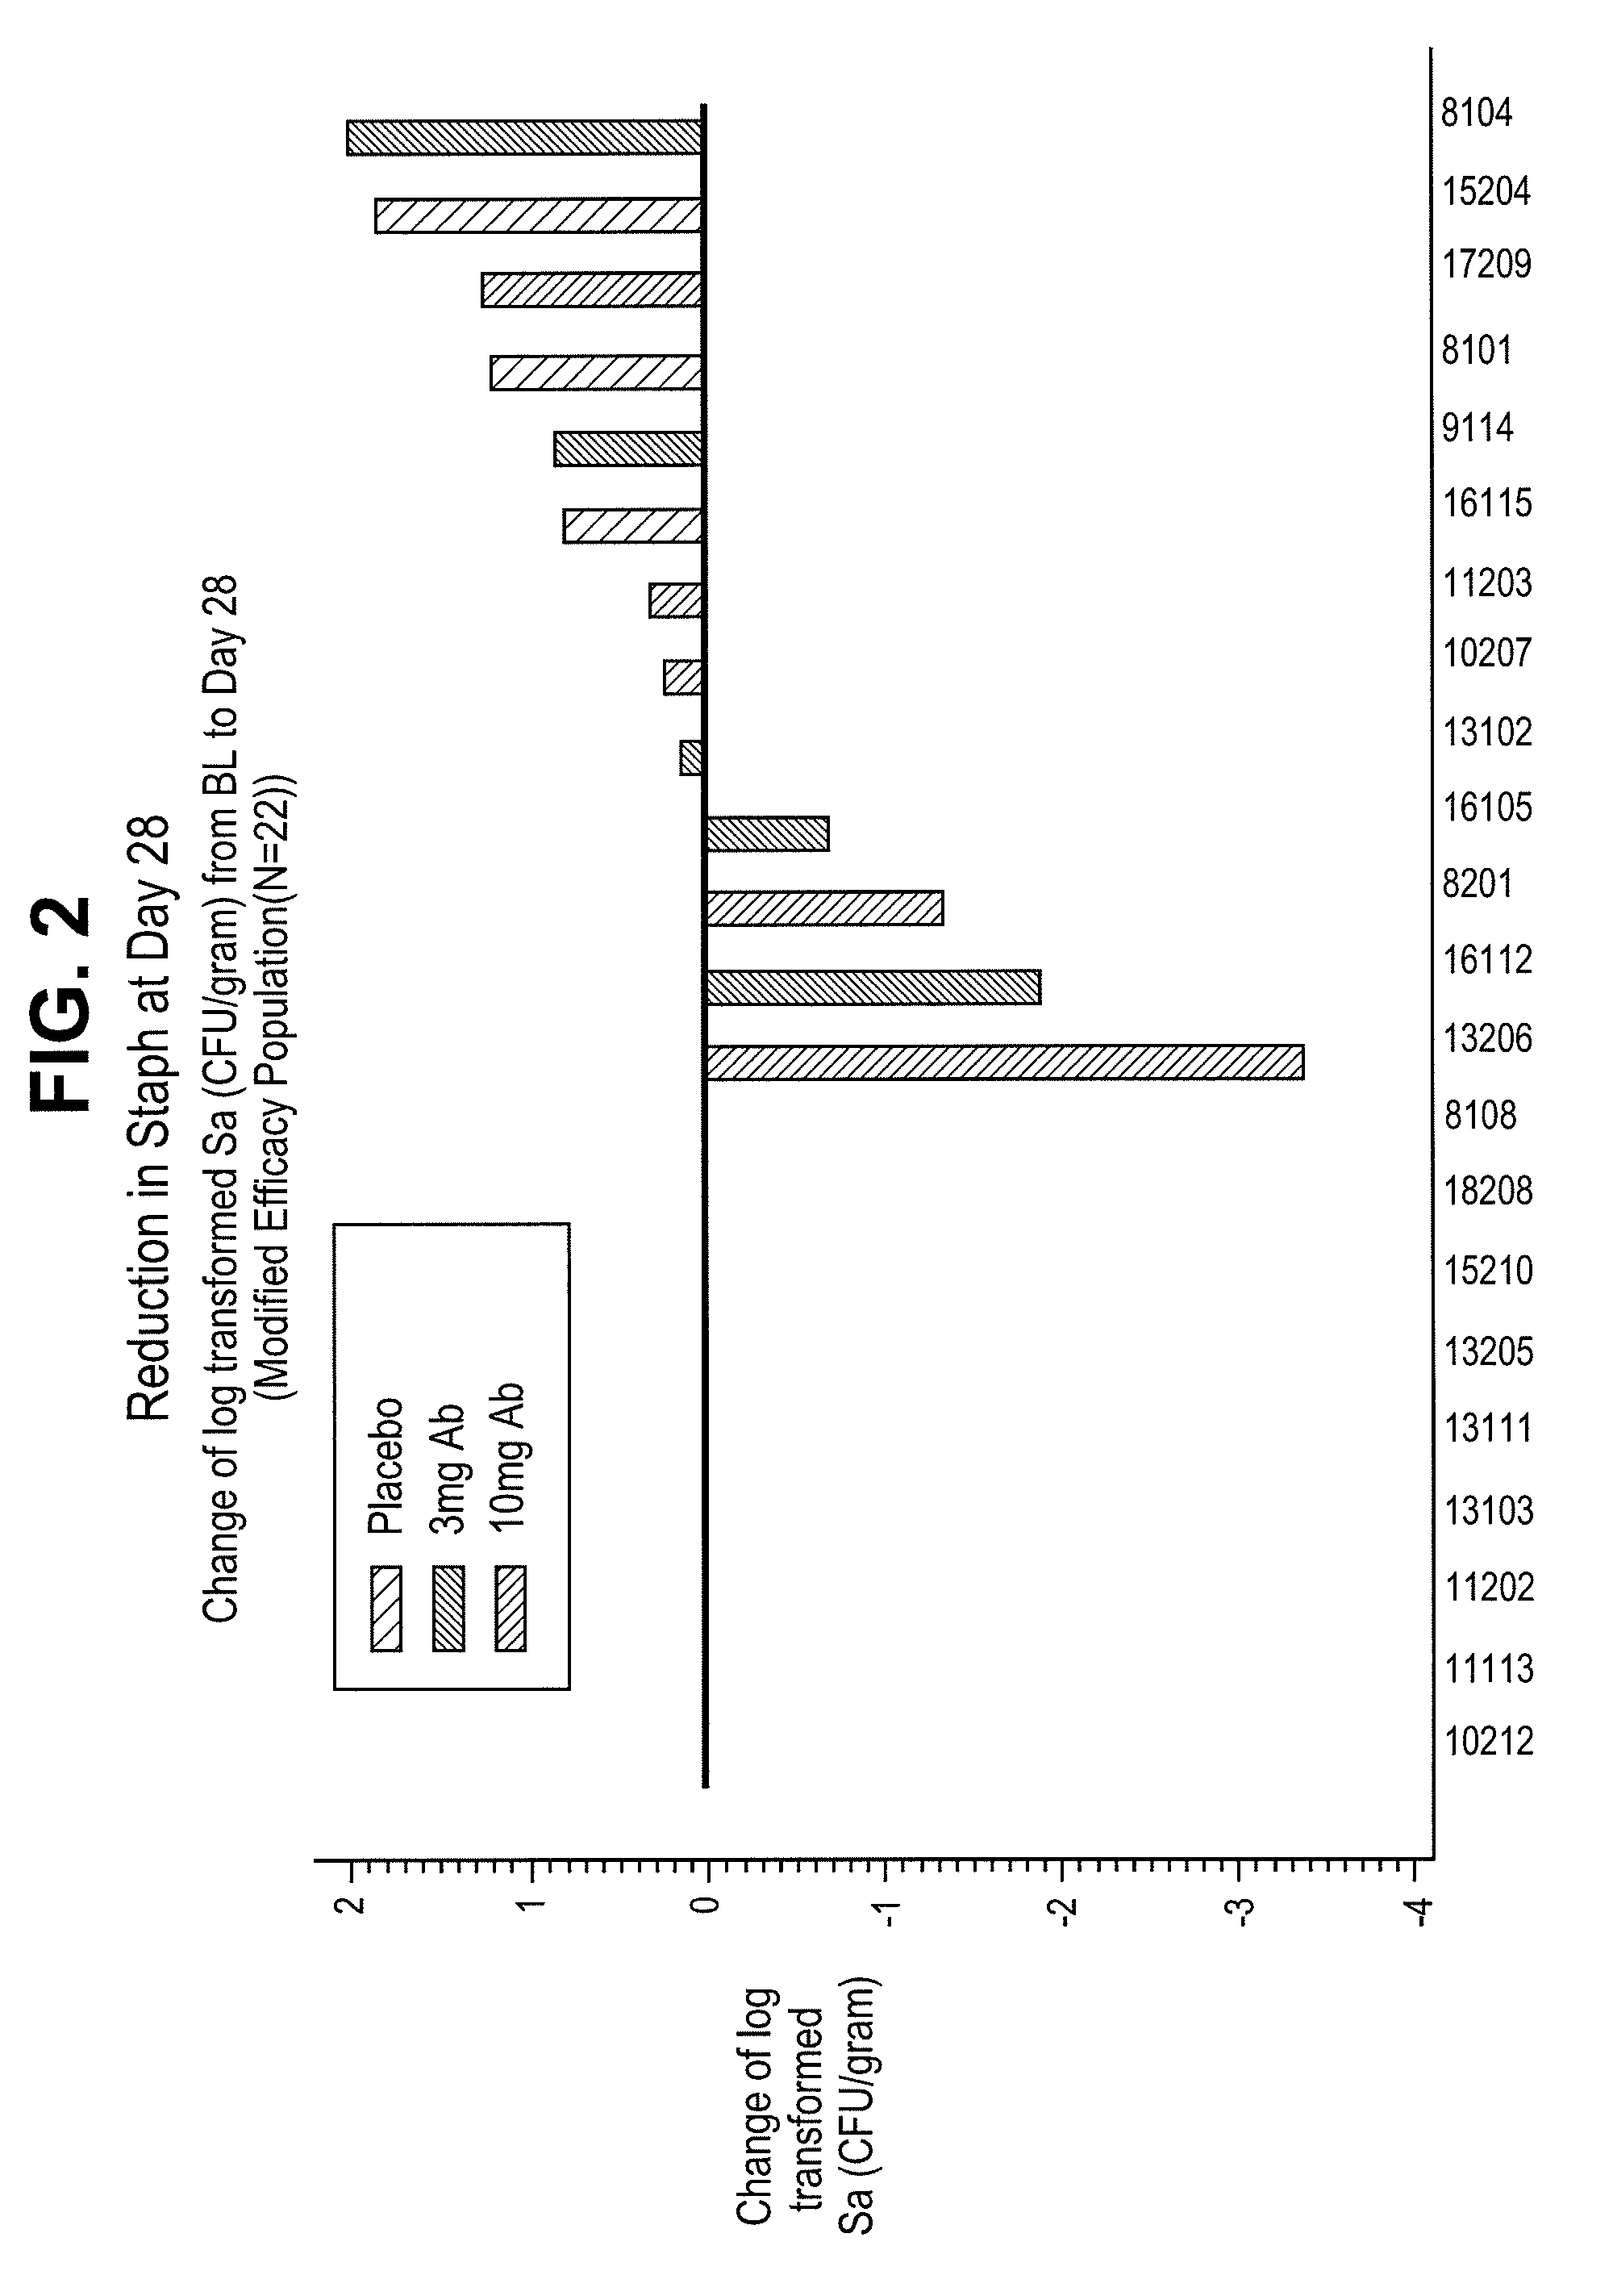 Method of treating a staphylococcus infection in a patient having a low-level pathogenic <i>Pseudomonas aeruginosa </i>infection